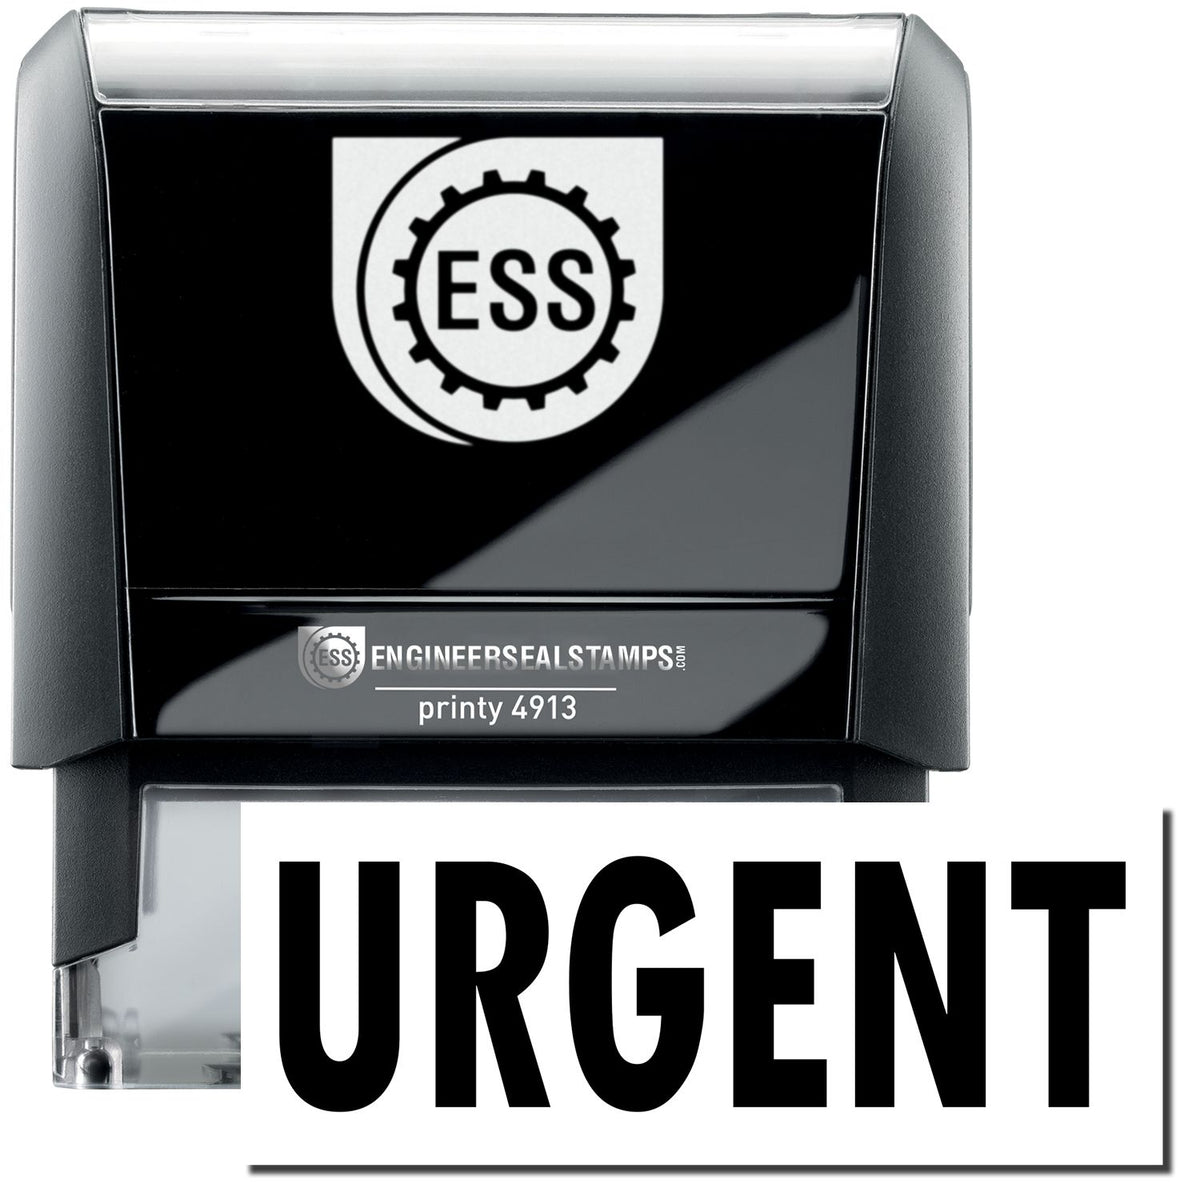 A self-inking stamp with a stamped image showing how the text &quot;URGENT&quot; in a large bold font is displayed by it.